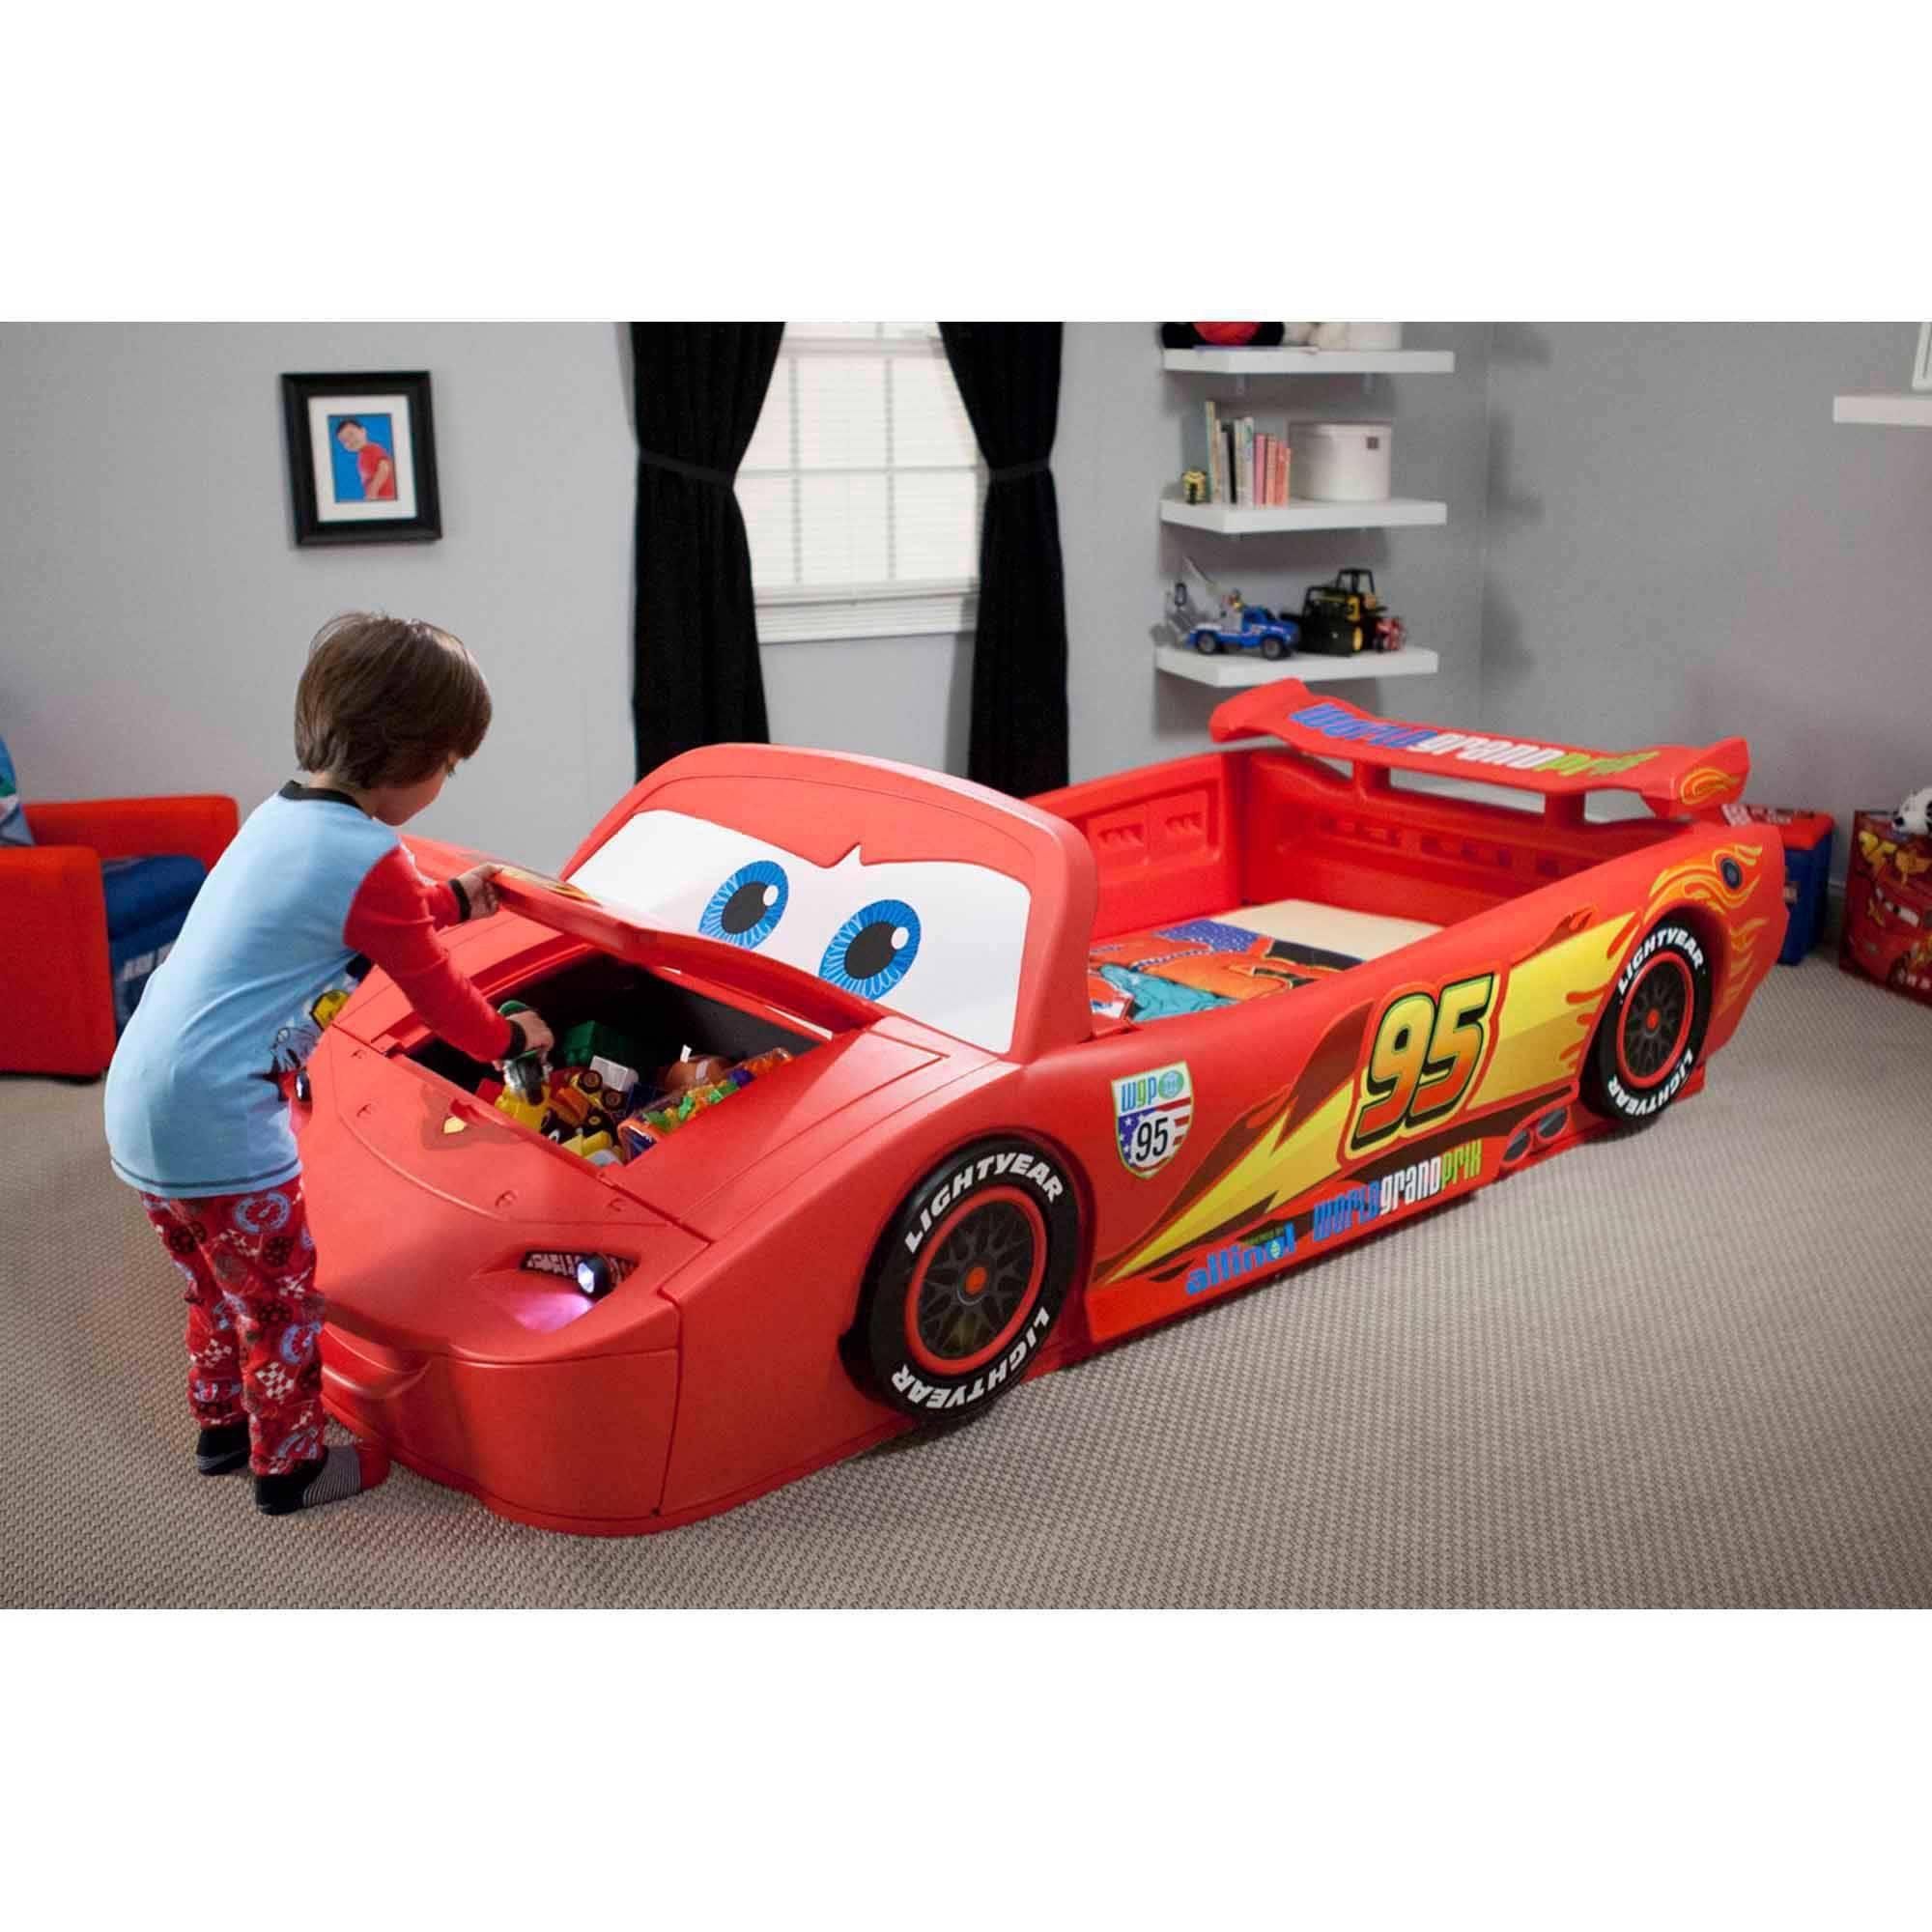 Your child’s first car bed